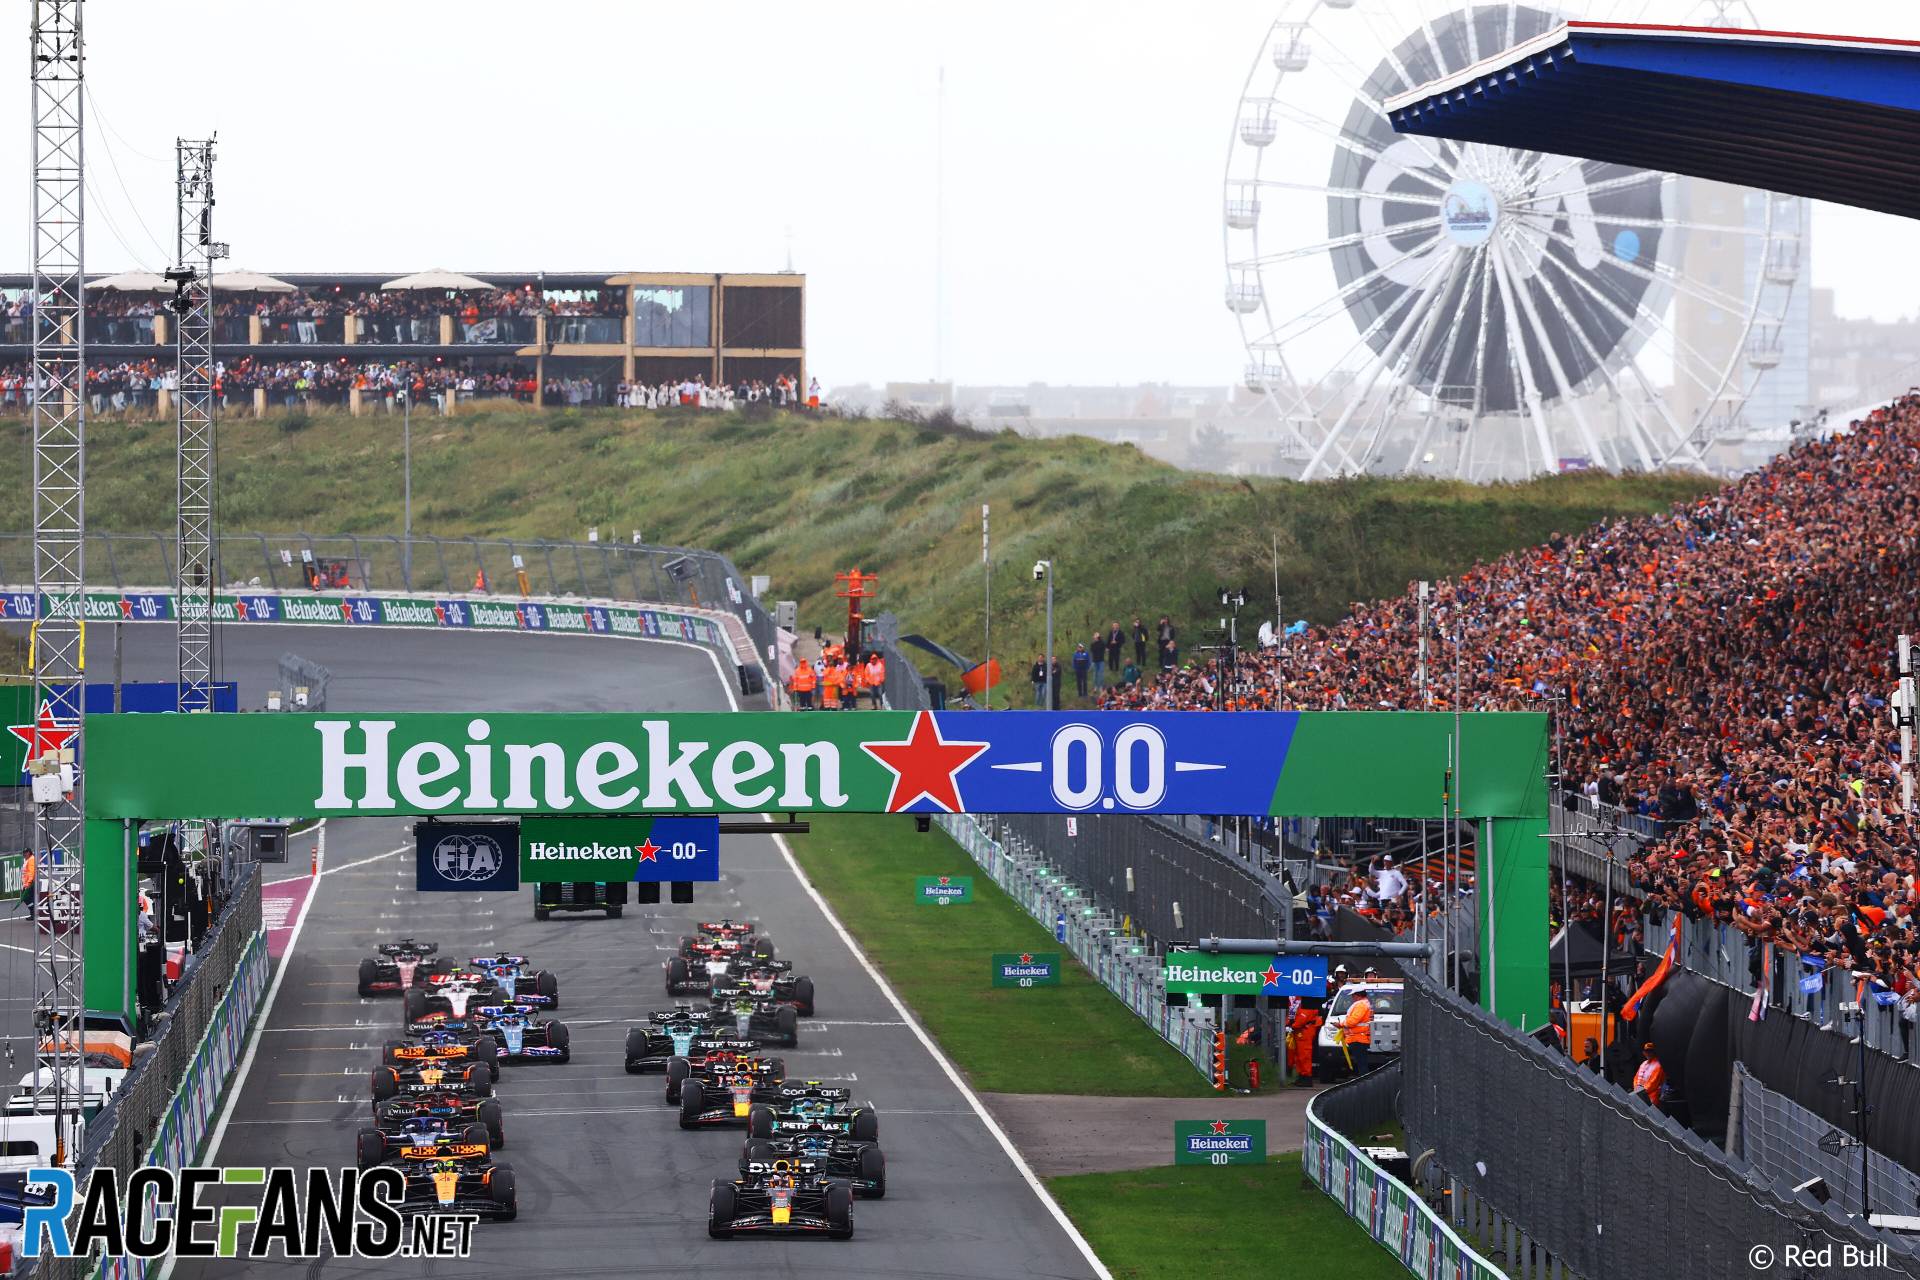 The 2023 Dutch Grand Prix was round 13 of the 2023 Formula 1 season. It took place at Zandvoort.